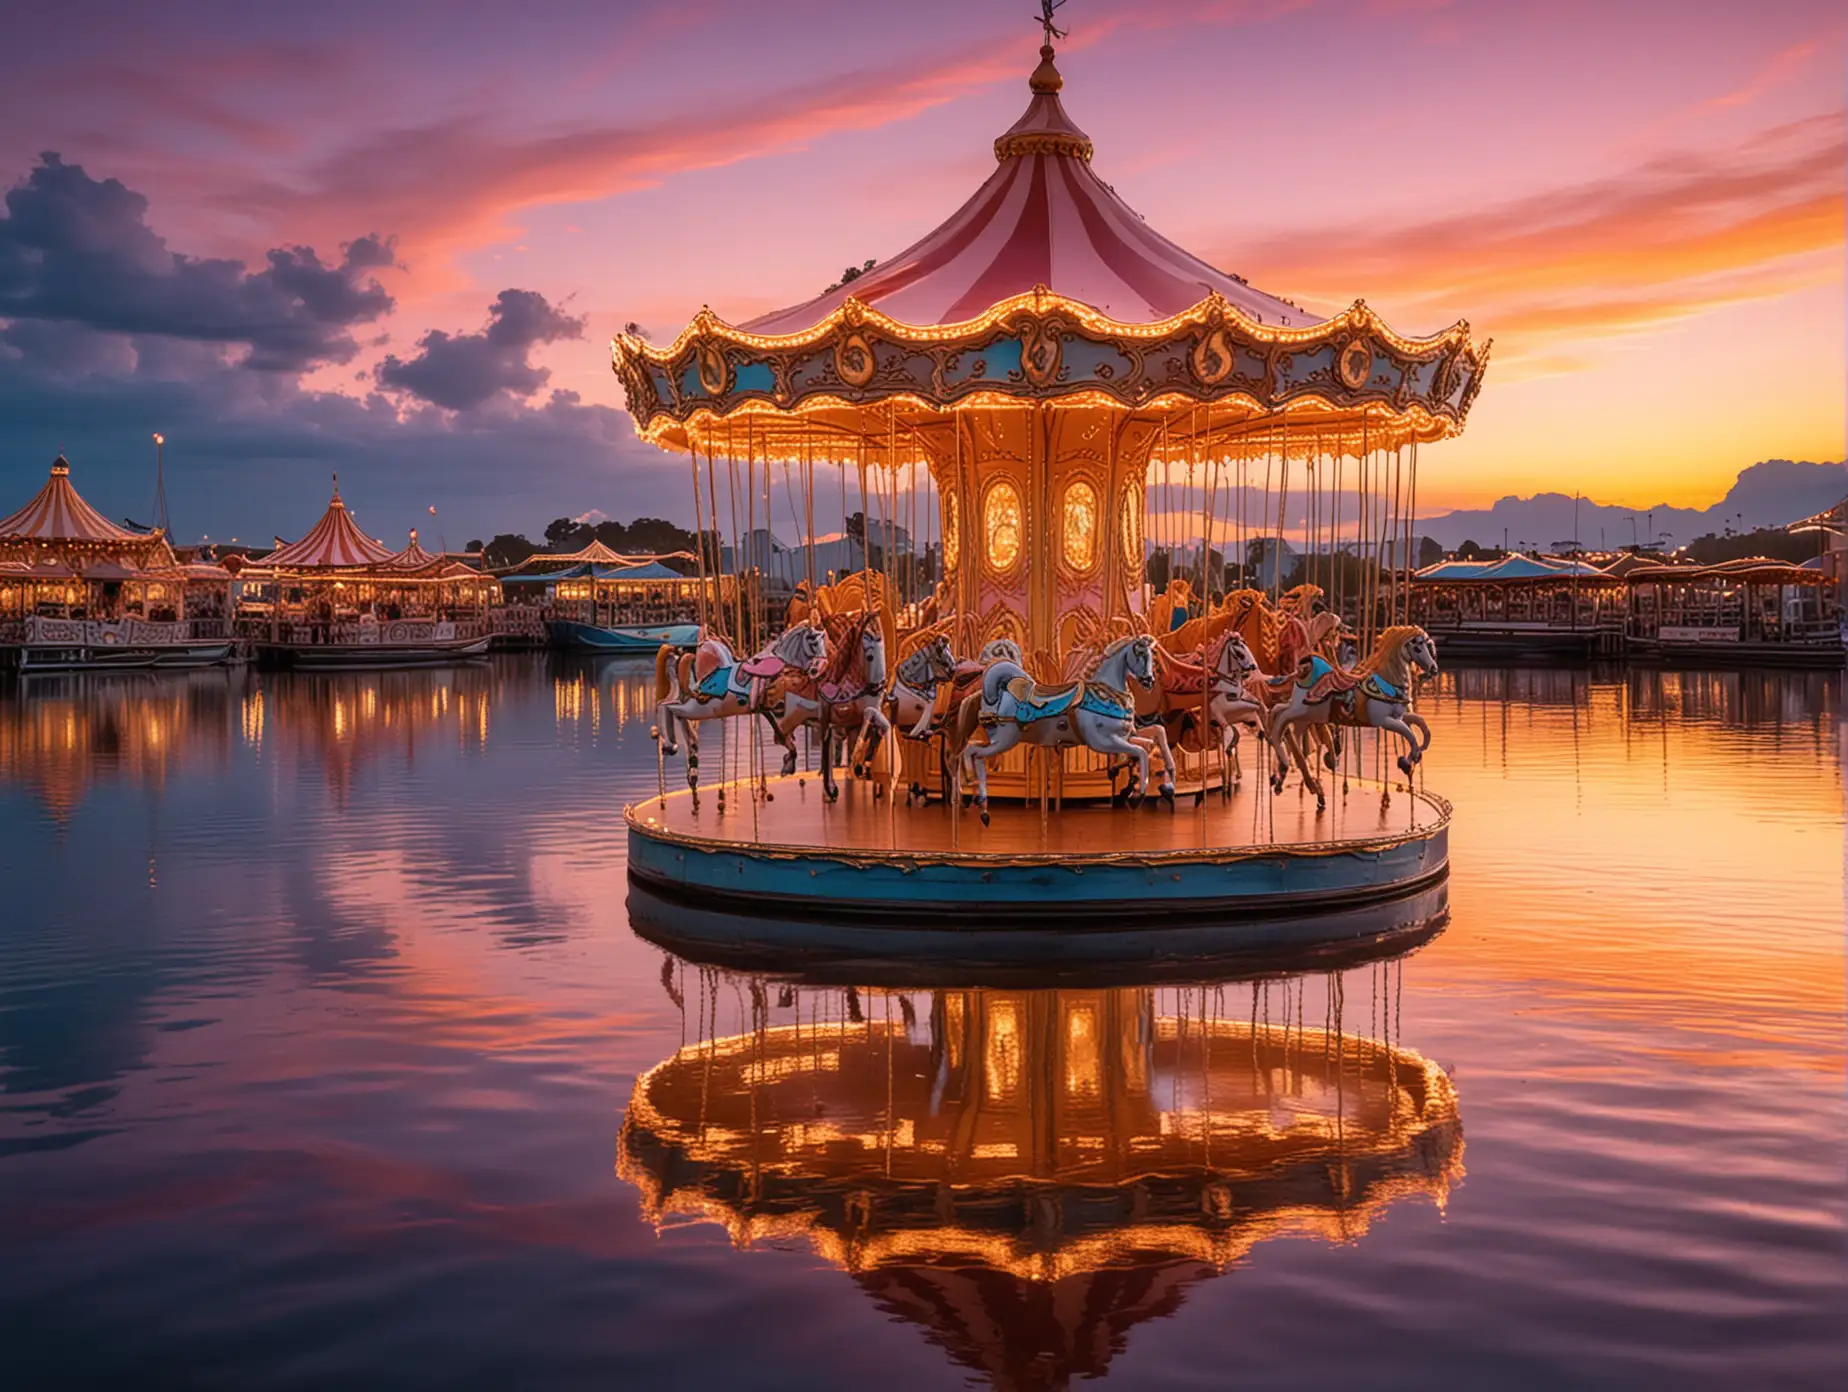 Golden Carousel at Sunset Over Water Reflective Serenity